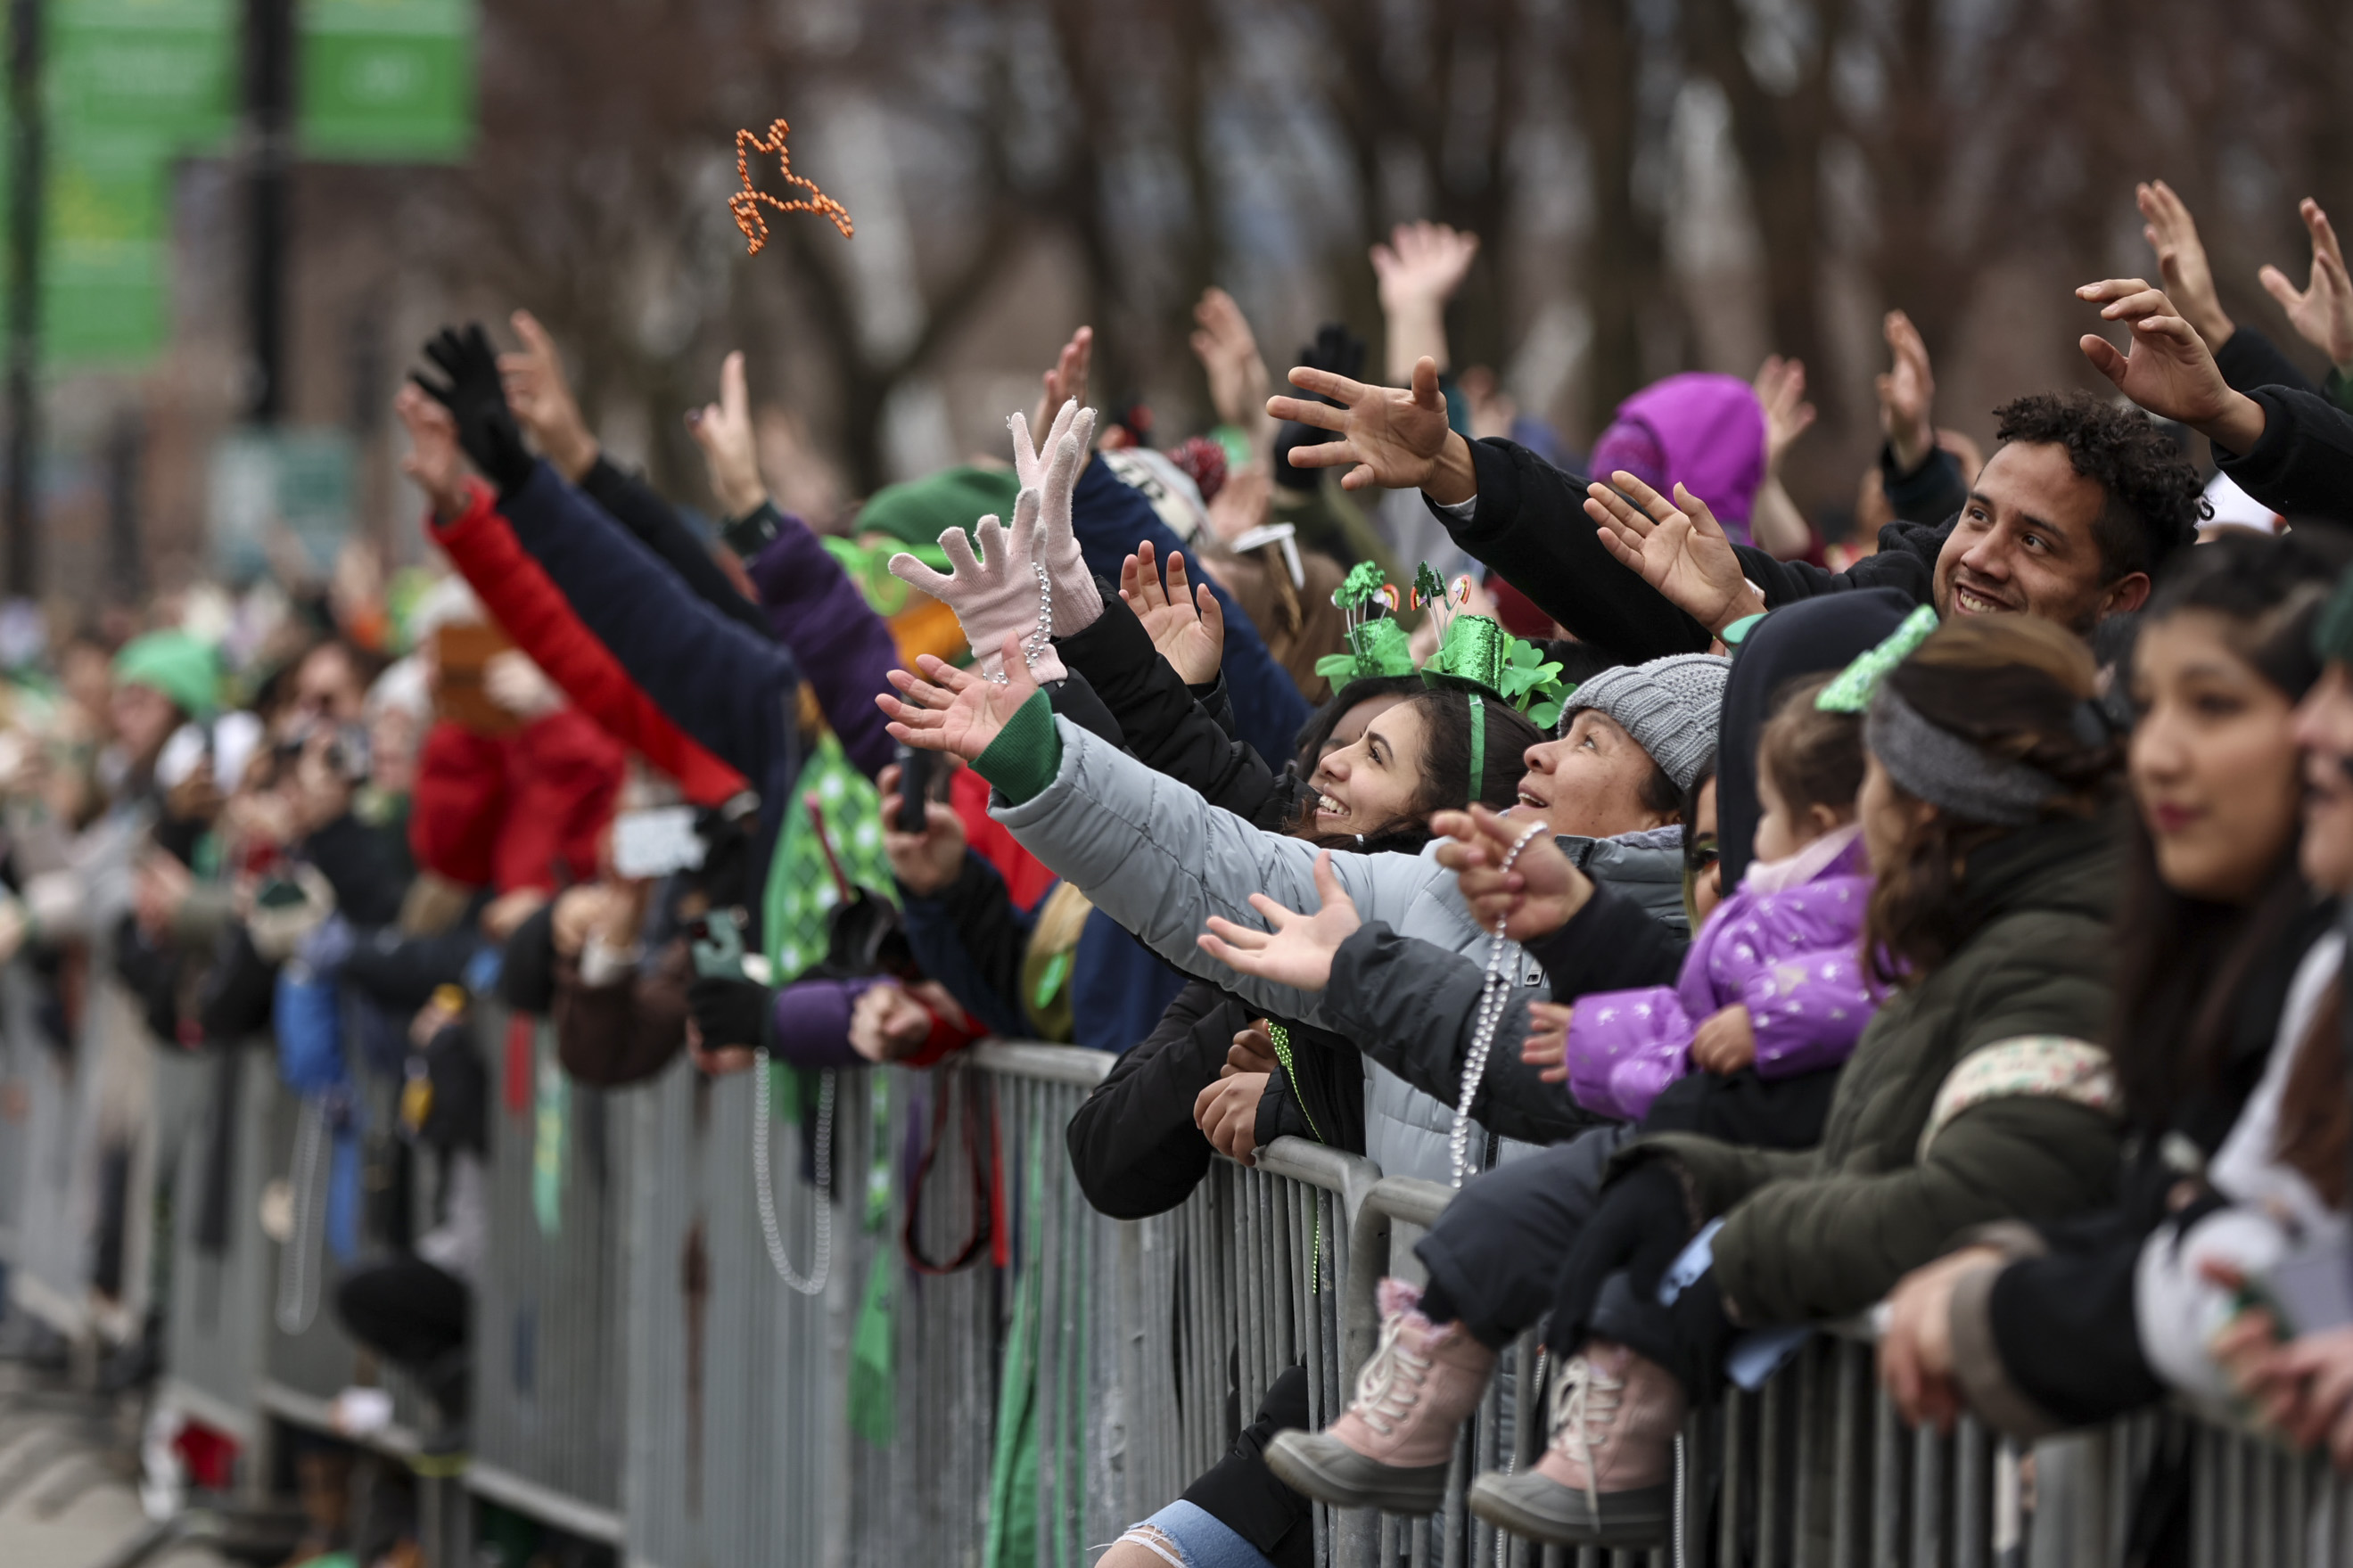 Chicago, Illinois, USA - March 16, 2019: St. Patrick's Day Parade